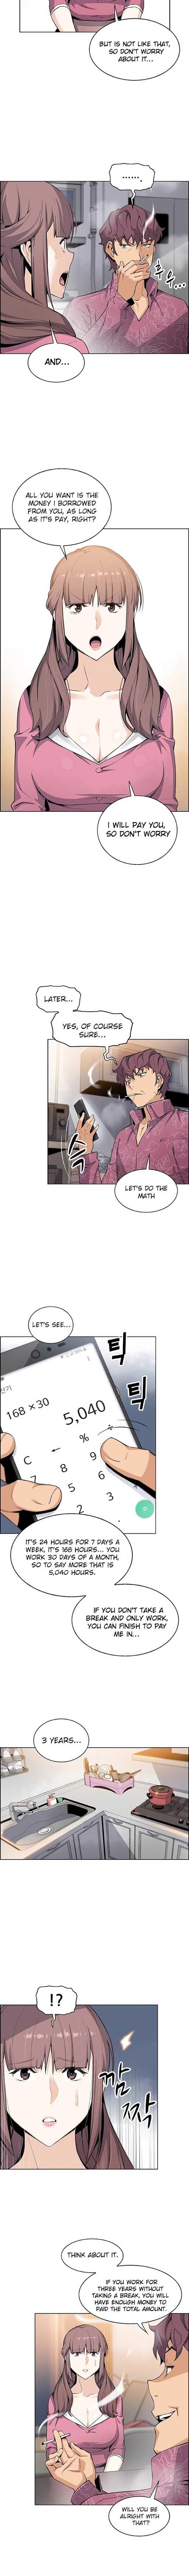 Housekeeper [Neck Pillow, Paper] Ch.49/49 [English] [Manhwa PDF] Completed 253